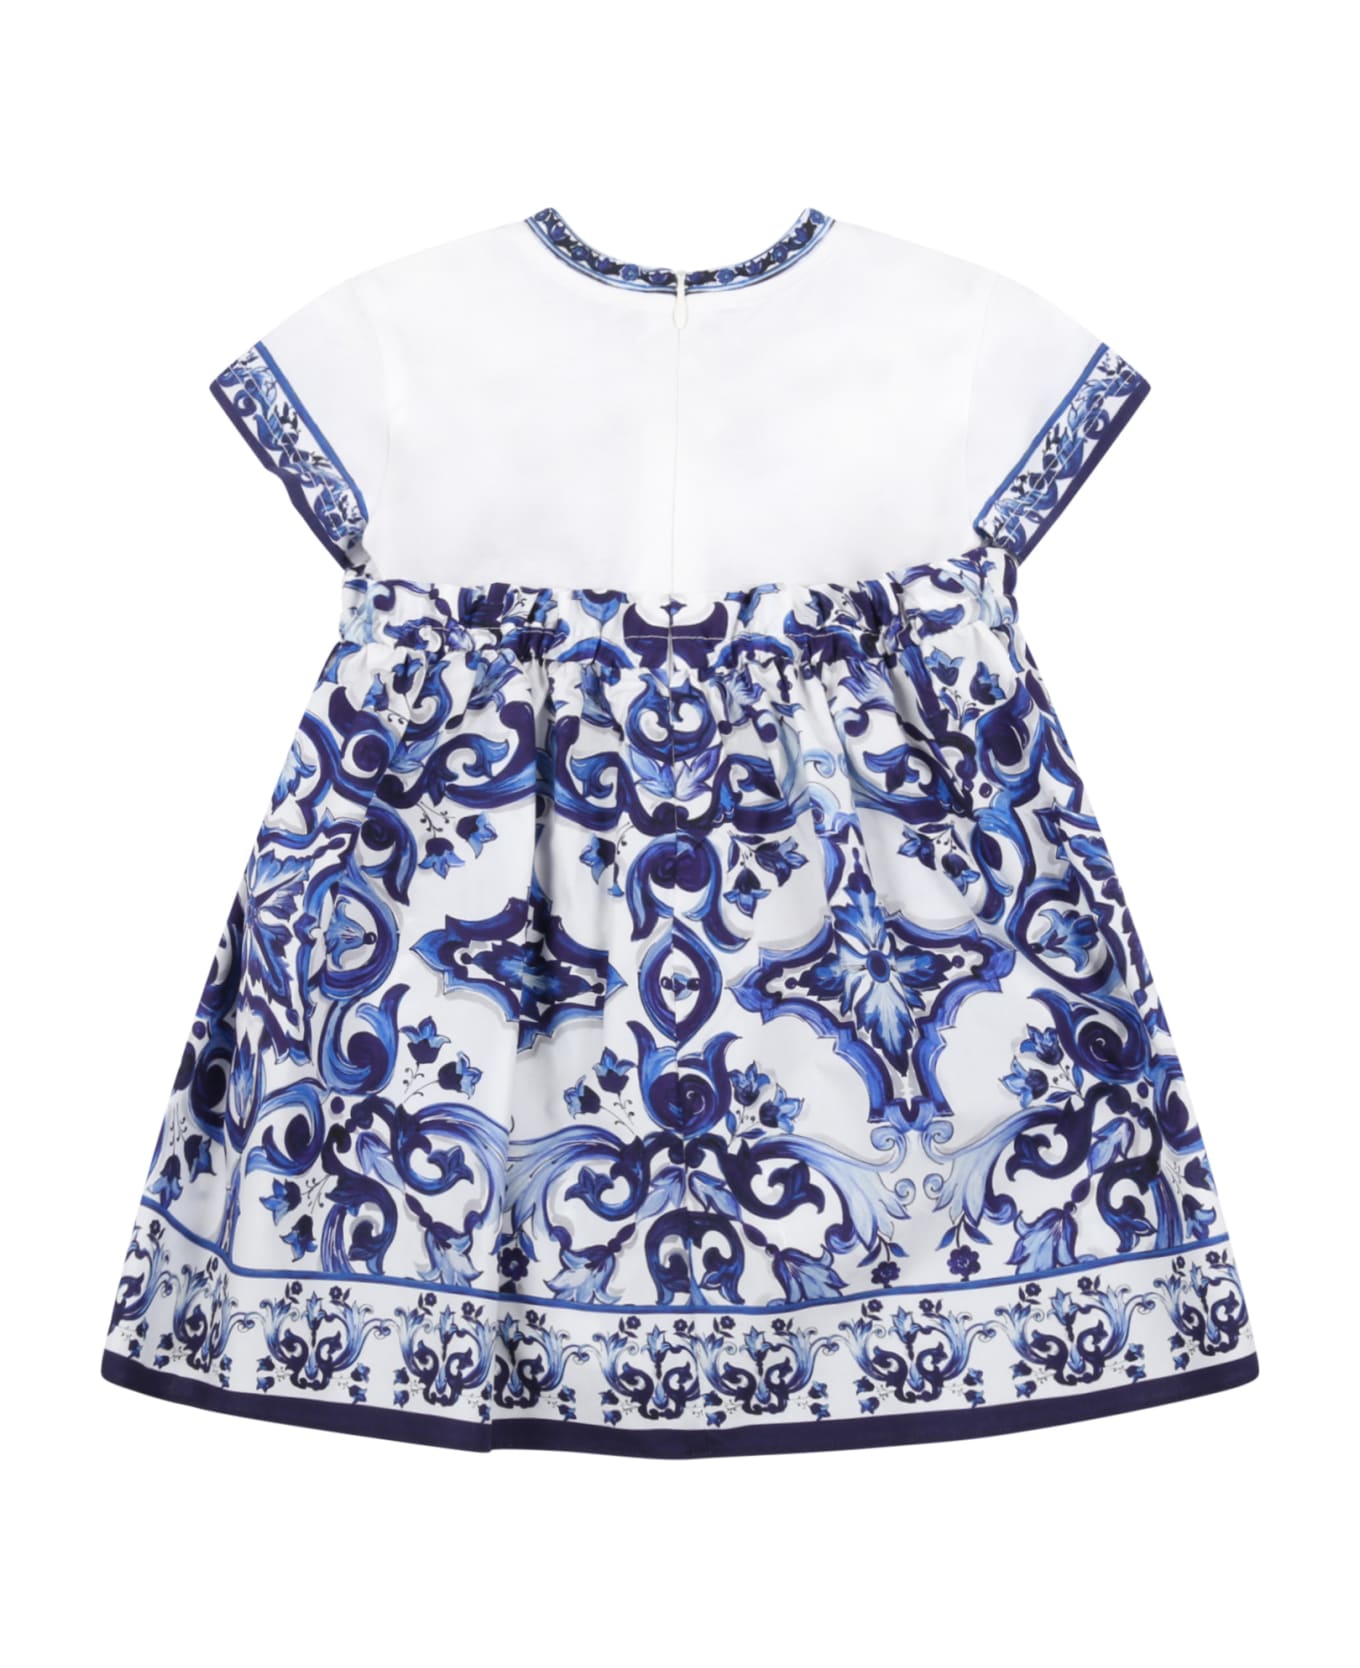 Dolce & Gabbana White Dress For Baby Girl With Logo - Multicolor